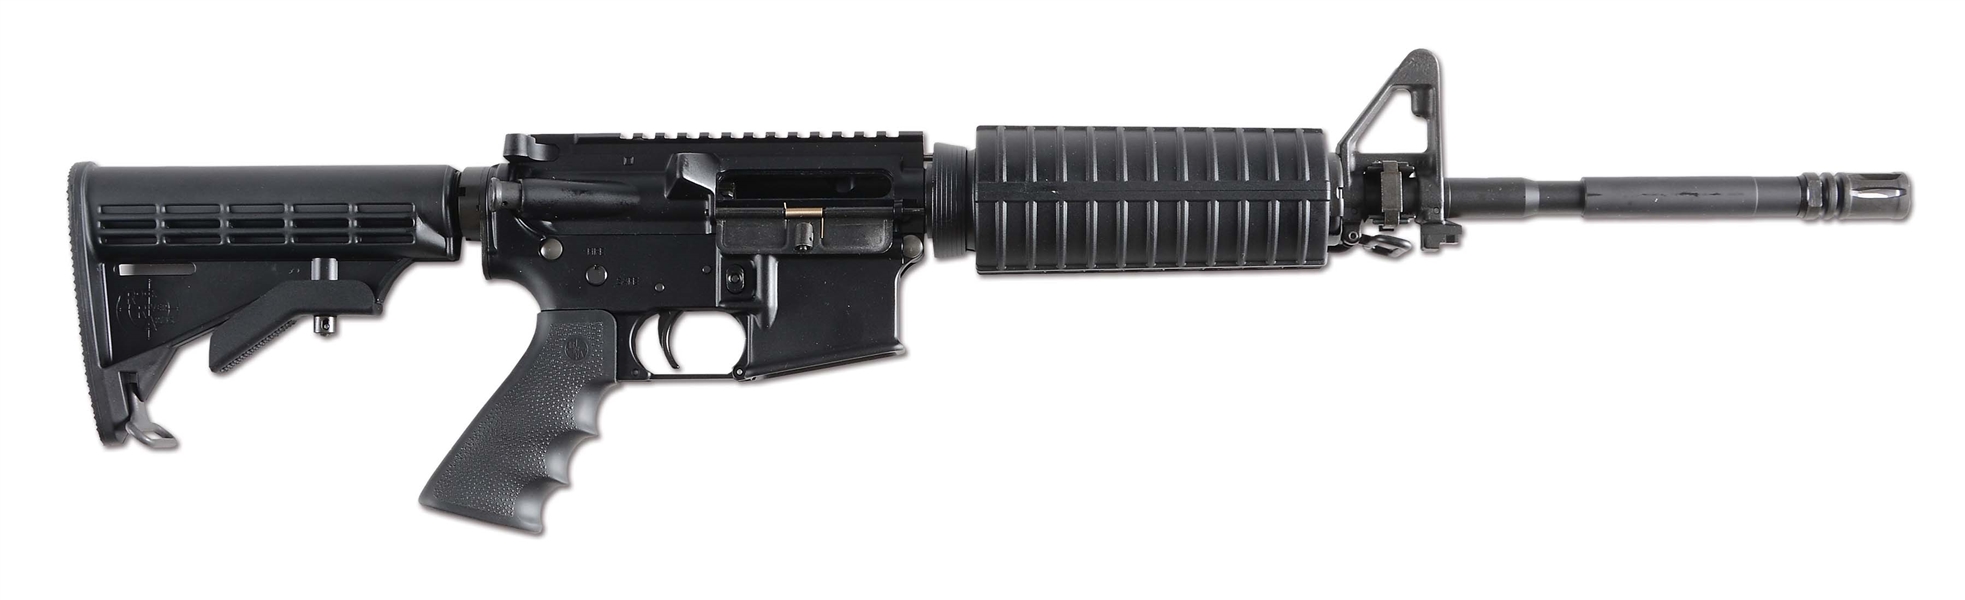 (M) NIB ROCK RIVER ARMS LAR-15 CHAMBERED IN 5.56